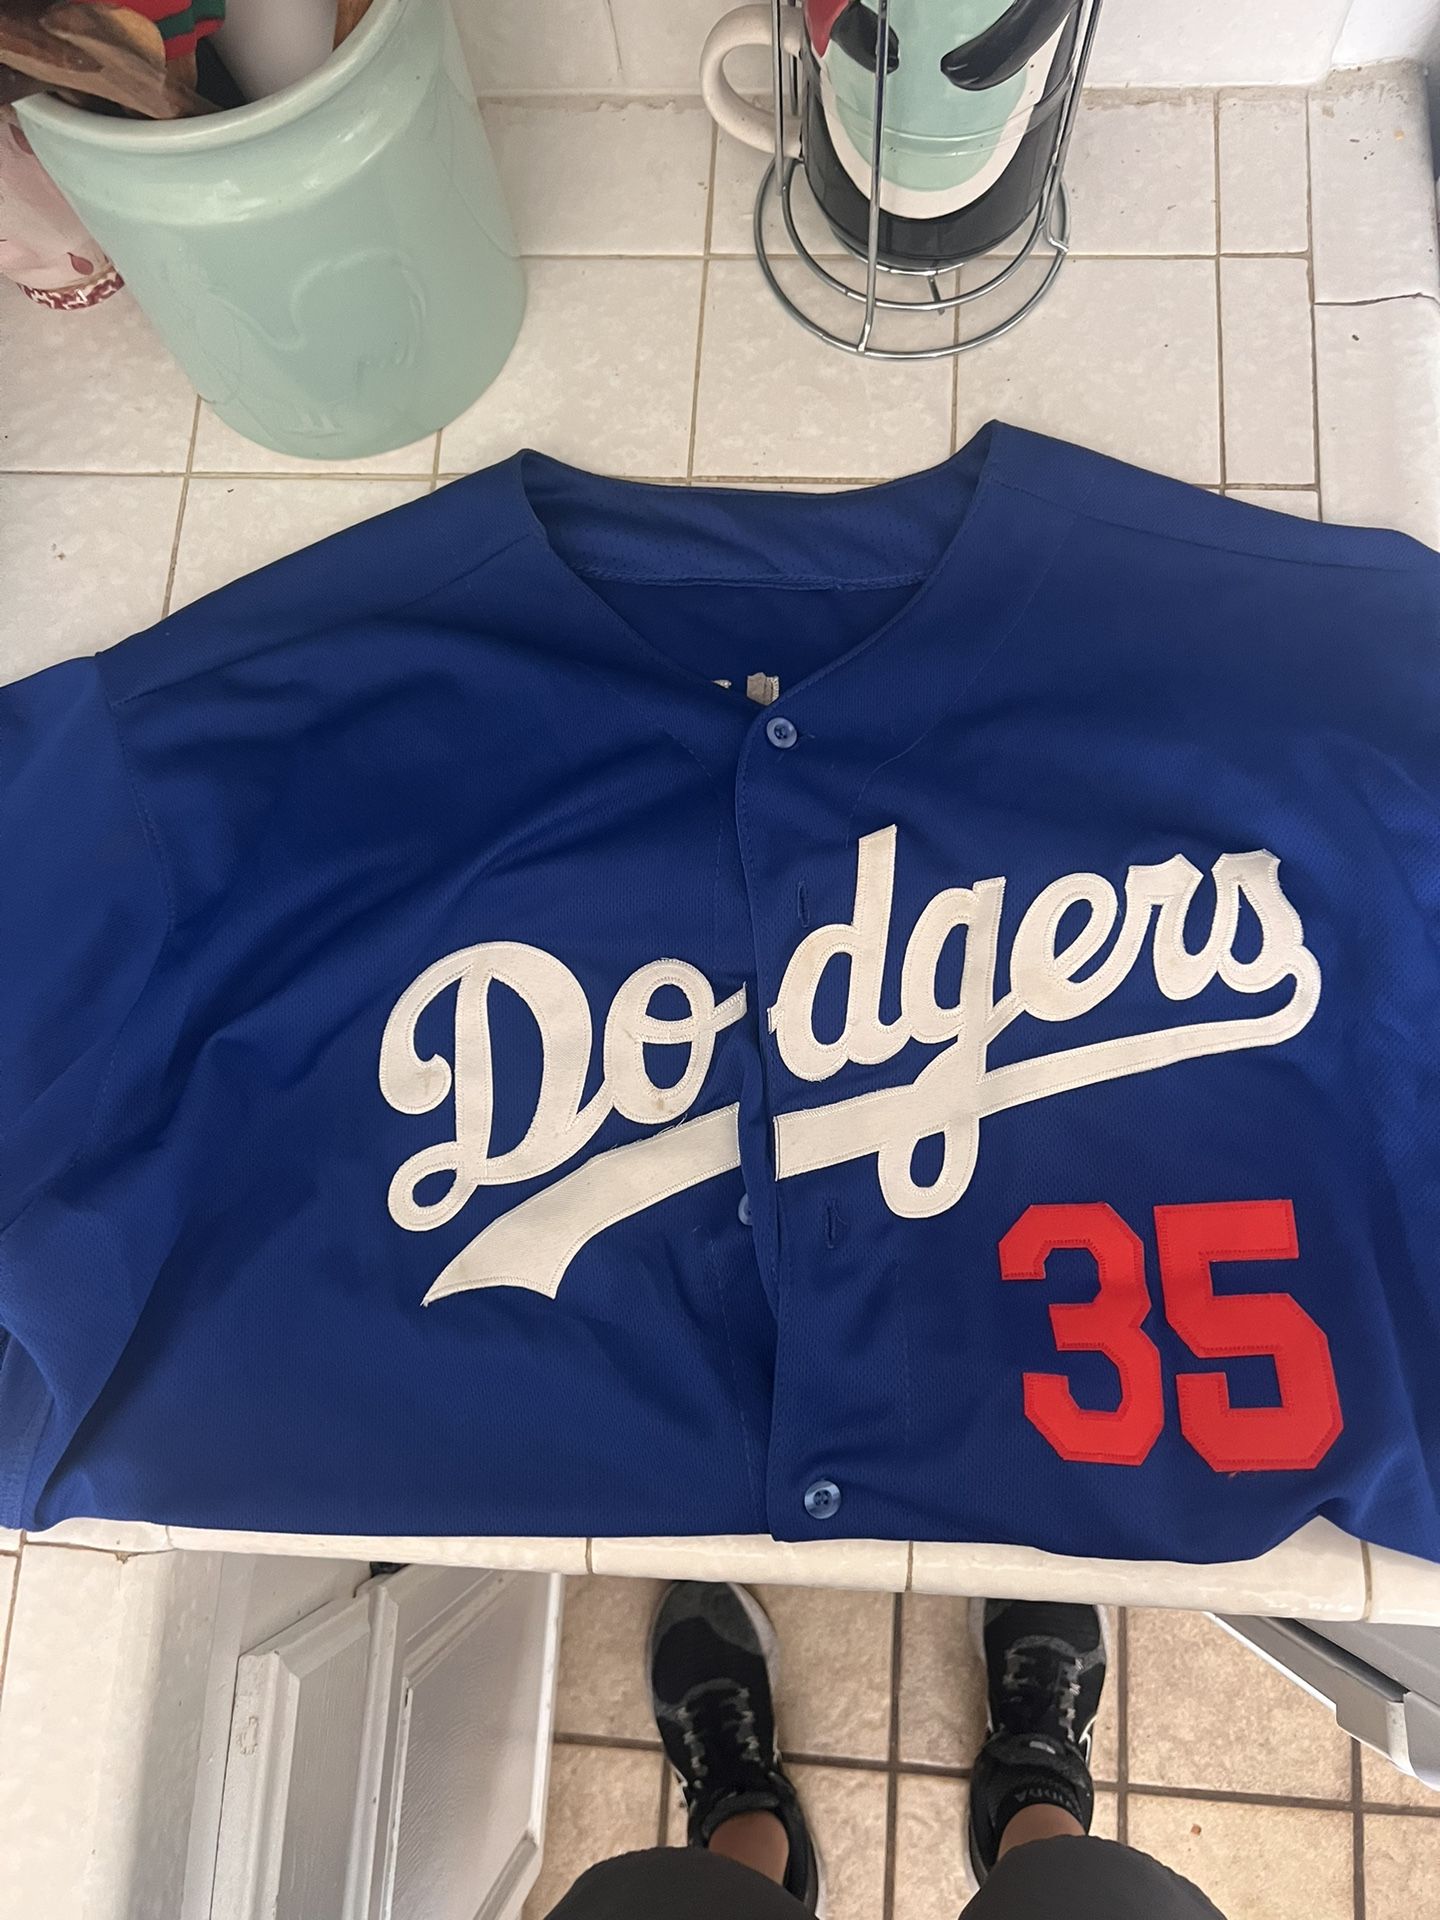 Bellinger Dodgers XL jersey for Sale in Lake View Terrace, CA - OfferUp